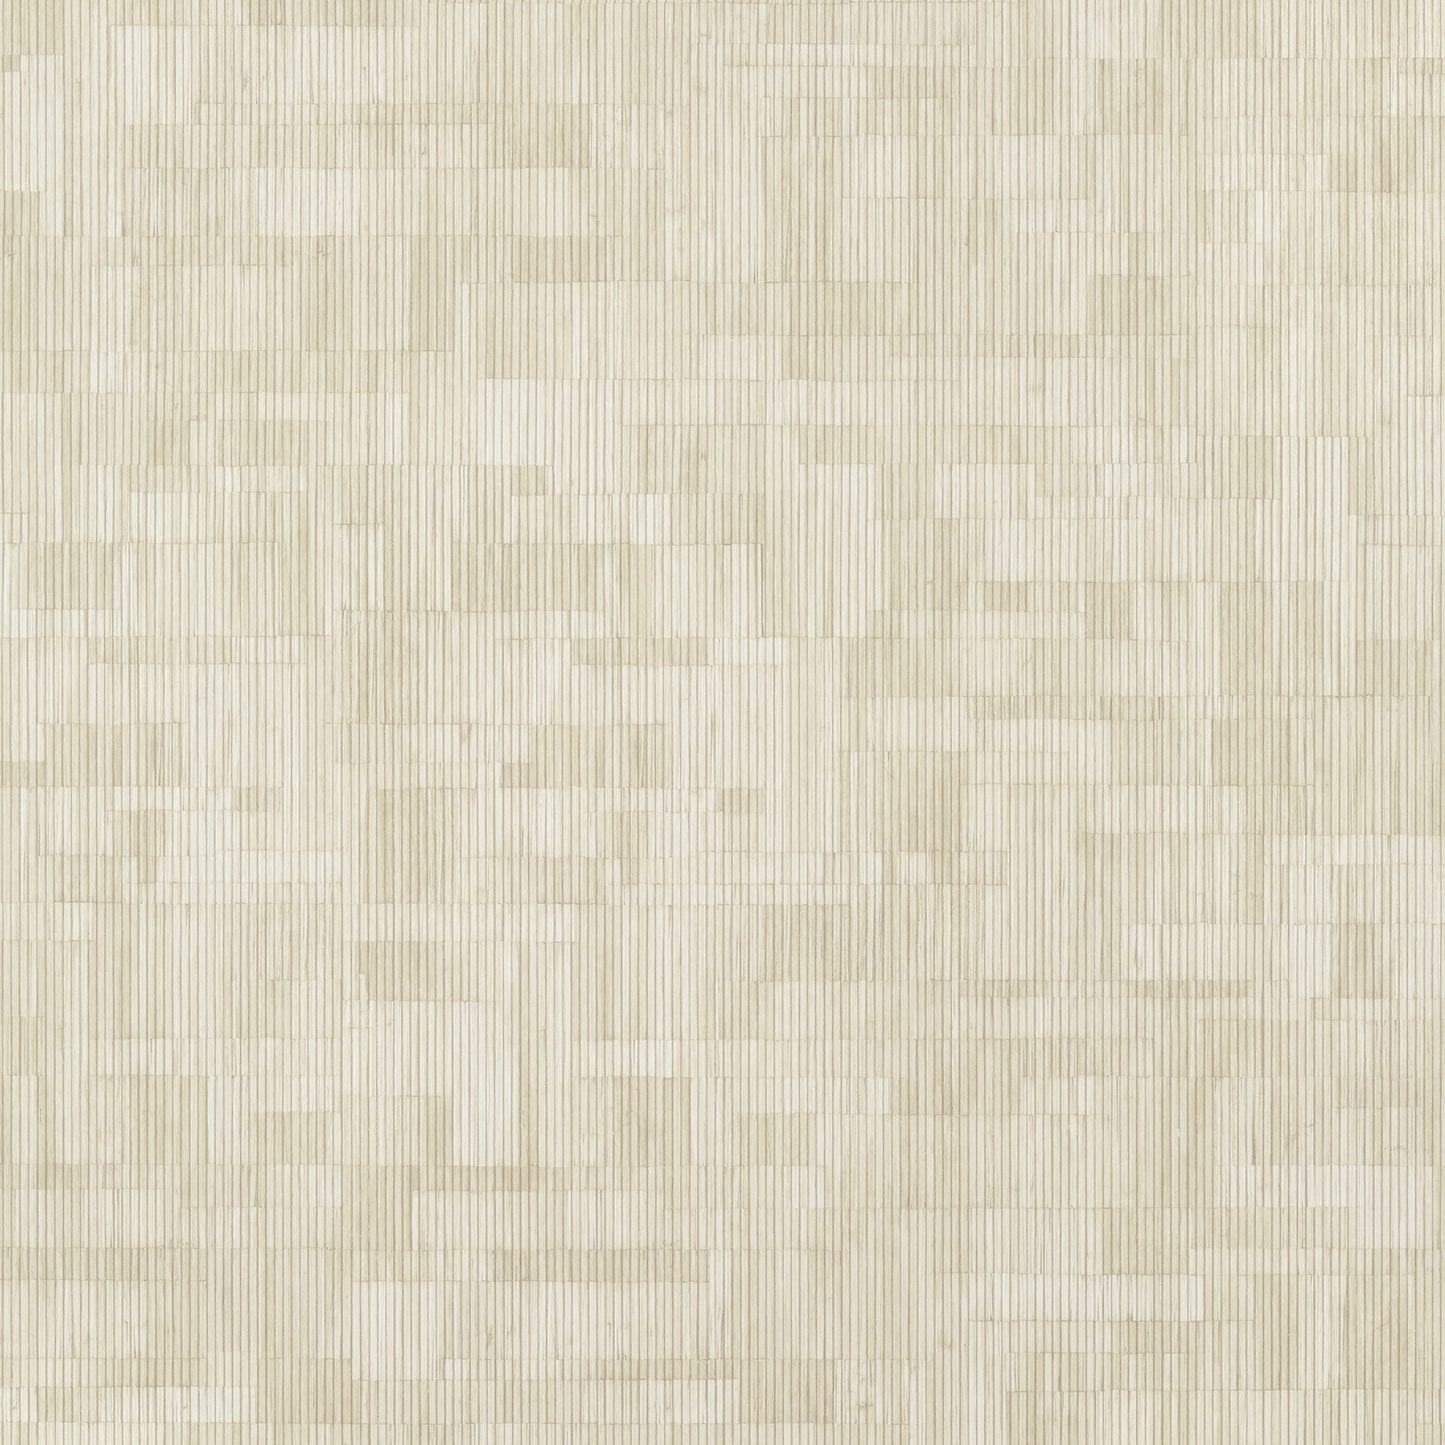 Purchase Thibaut Wallpaper Item# T41019 pattern name Bamboo Mosaic color Sand. 